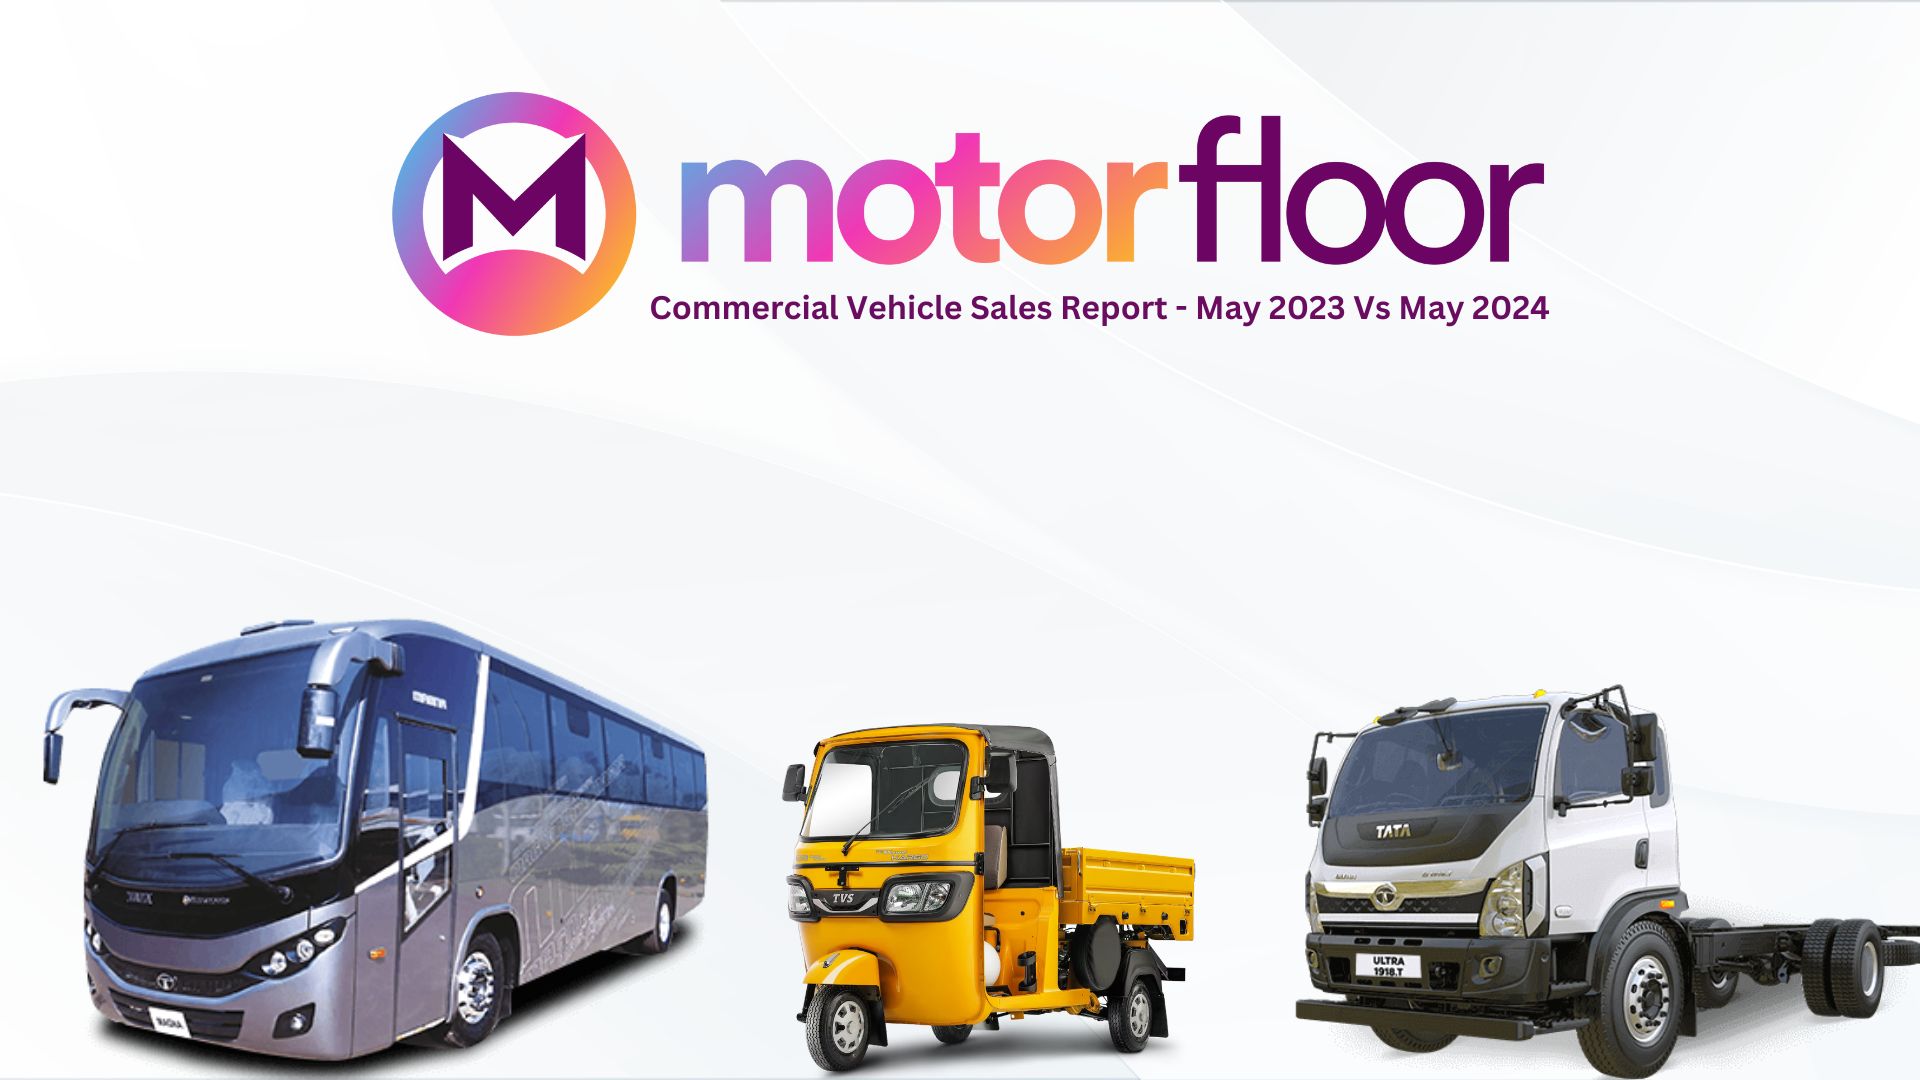 Commercial Vehicles Sales Report for May 23 and May 24